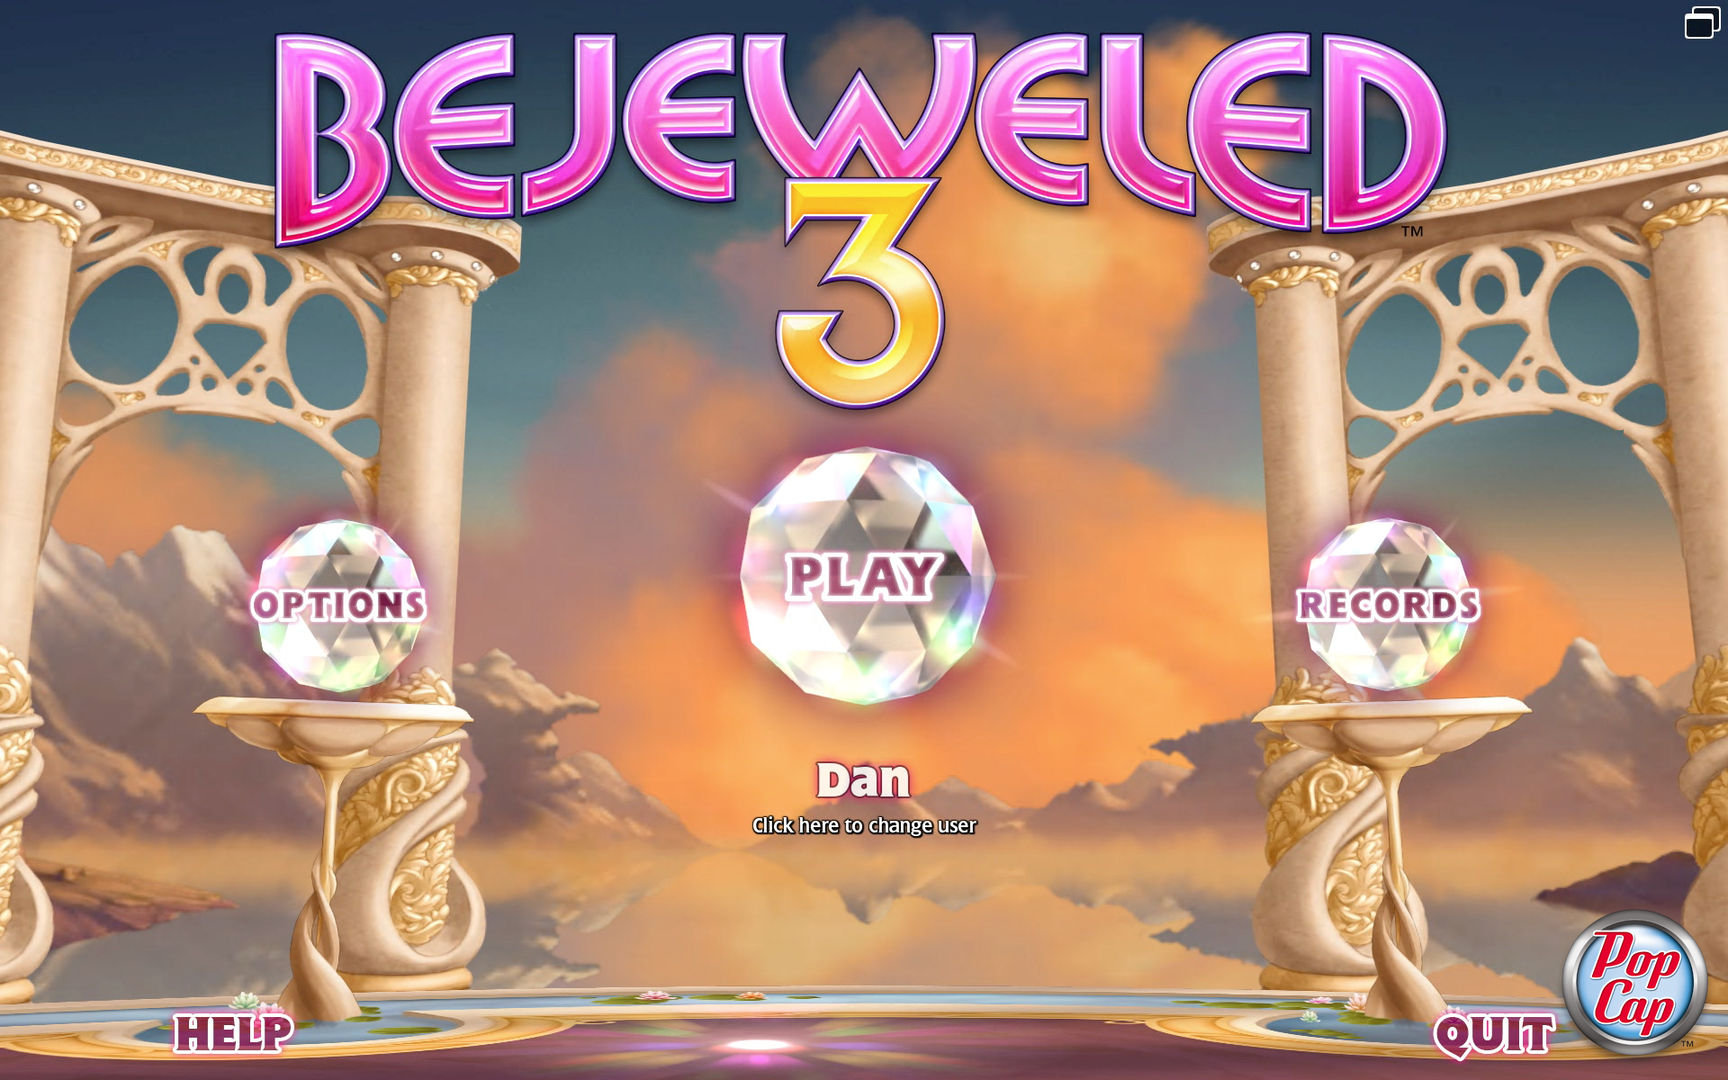 Download Bejeweled 3 Full Pc Game